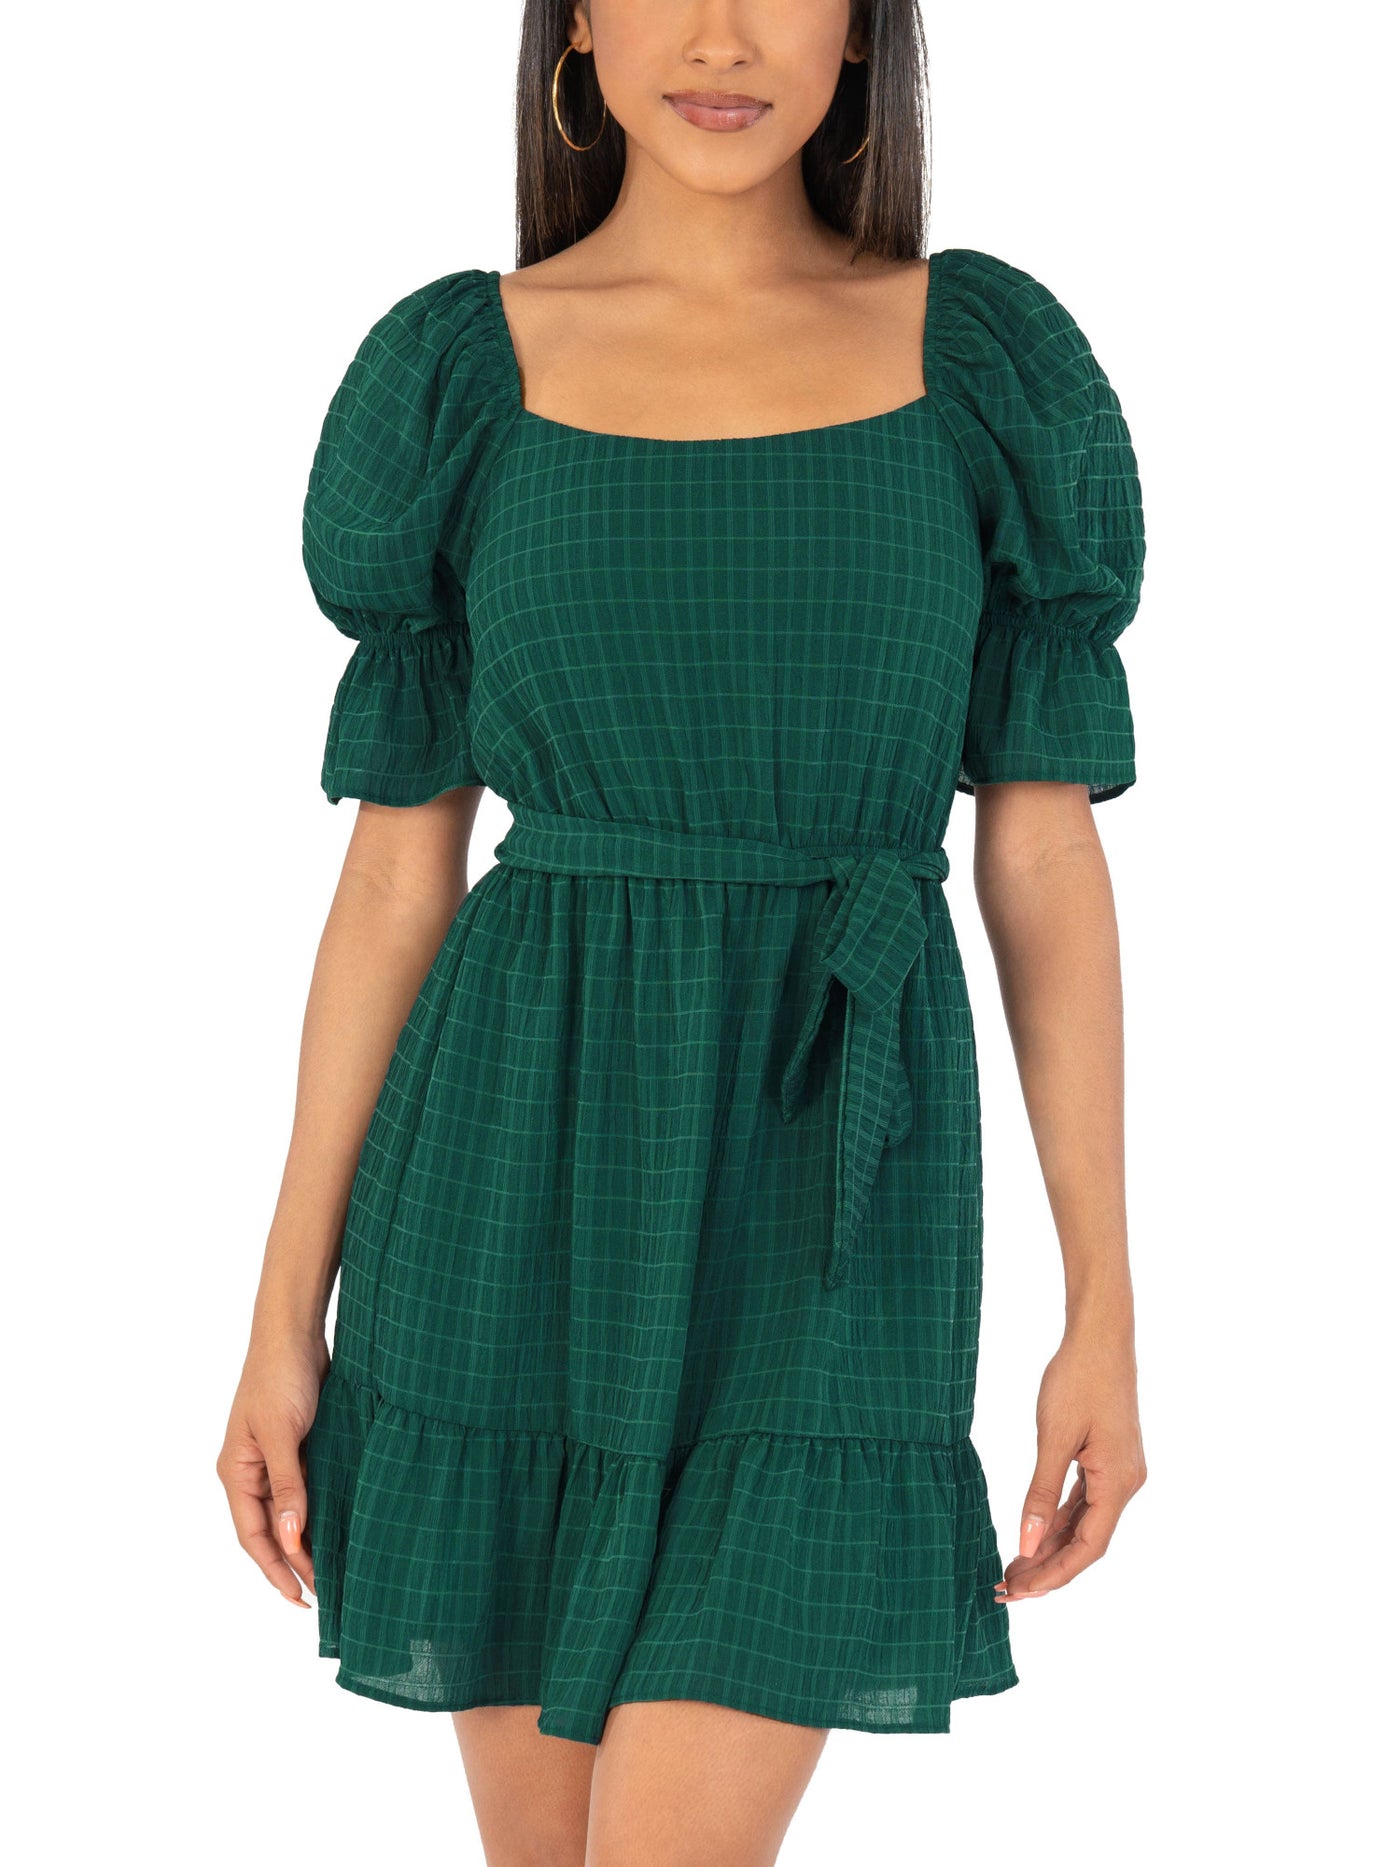 SPEECHLESS Womens Green Stretch Ruffled Belted Semi-sheer Lined Pouf Sleeve Square Neck Mini Party Fit + Flare Dress Juniors M